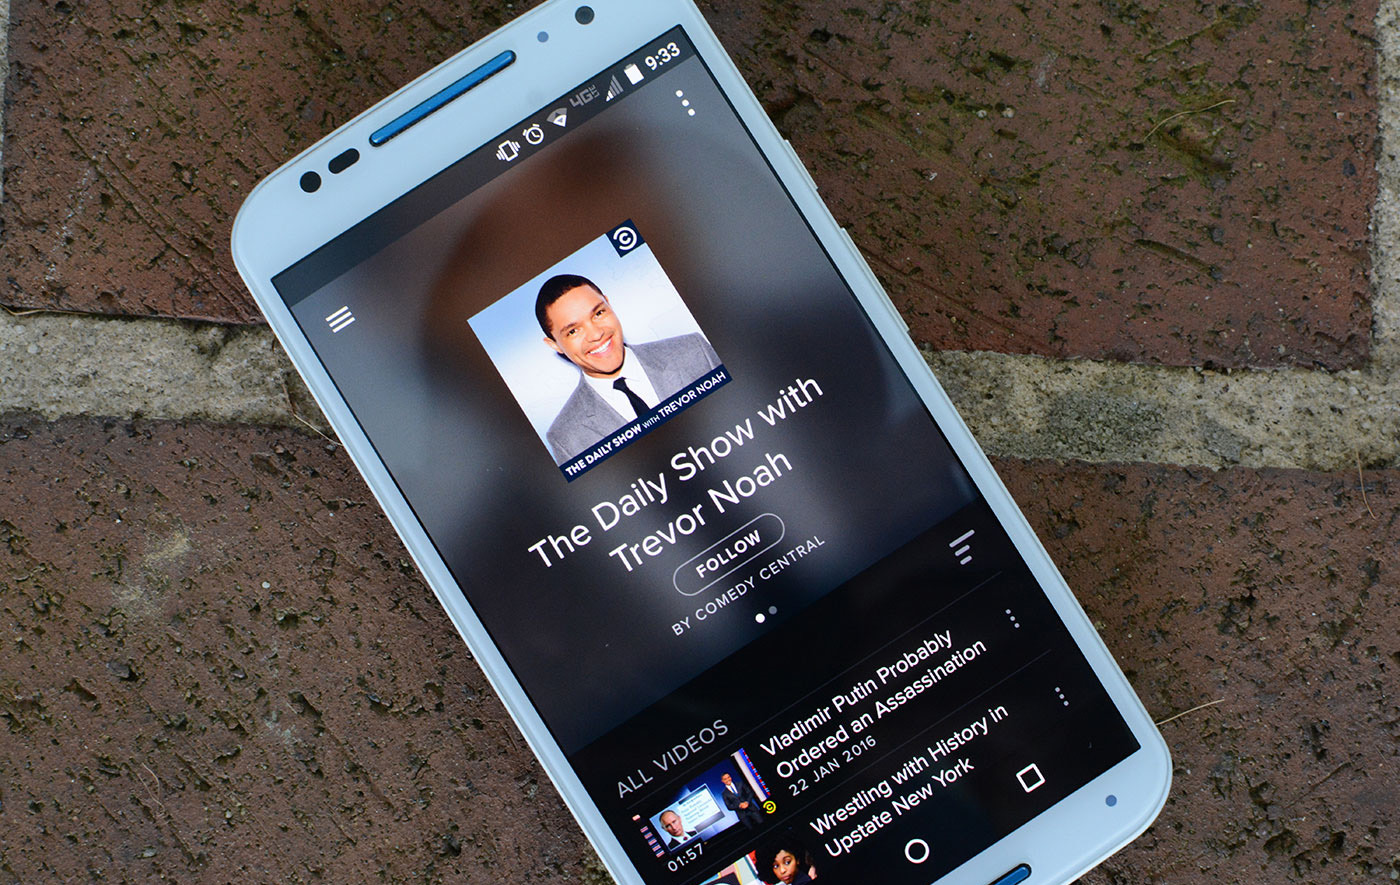 Spotify video streaming rolls out to Android users